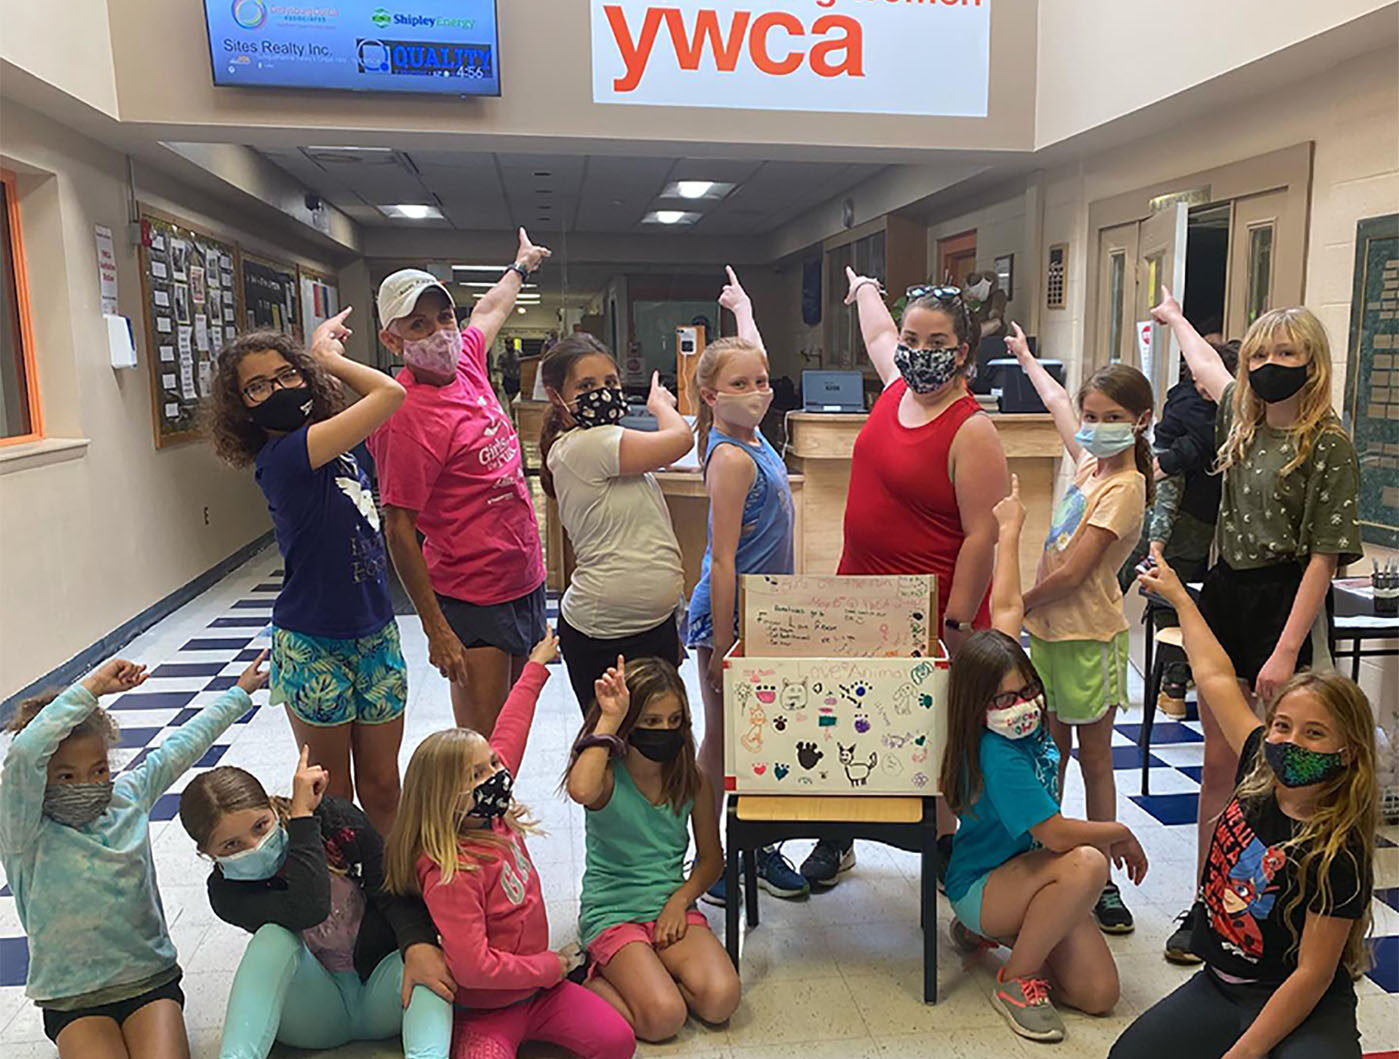 Group of women and kids with masks on pointing to the YWCA sign.